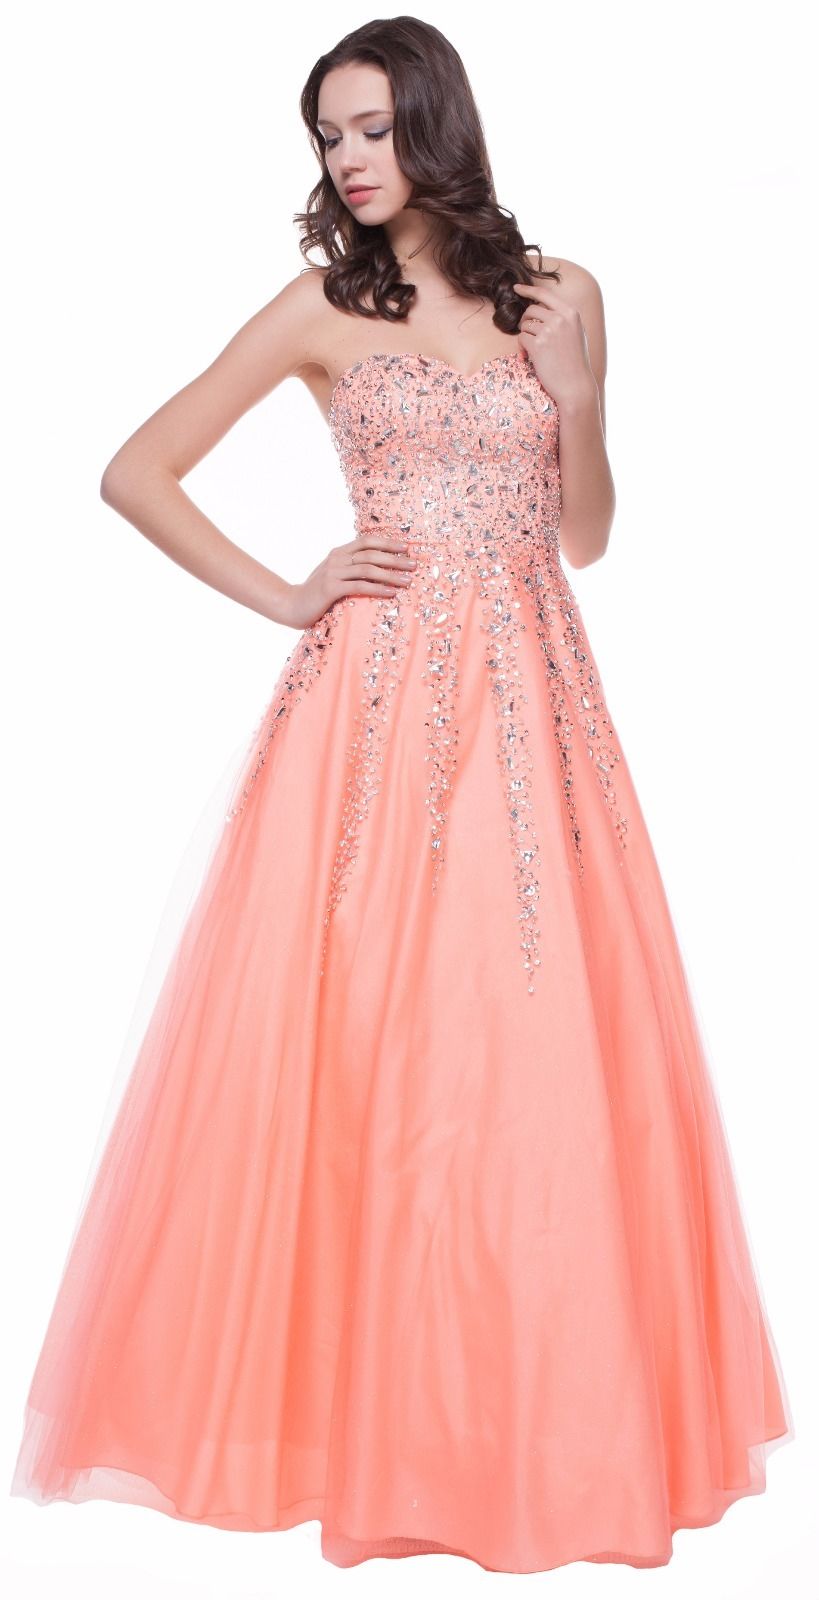 Luxury Coral Prom Dresses Long Elegant Tulle Beaded Evening Gowns - Formal Dresses, Party Dress